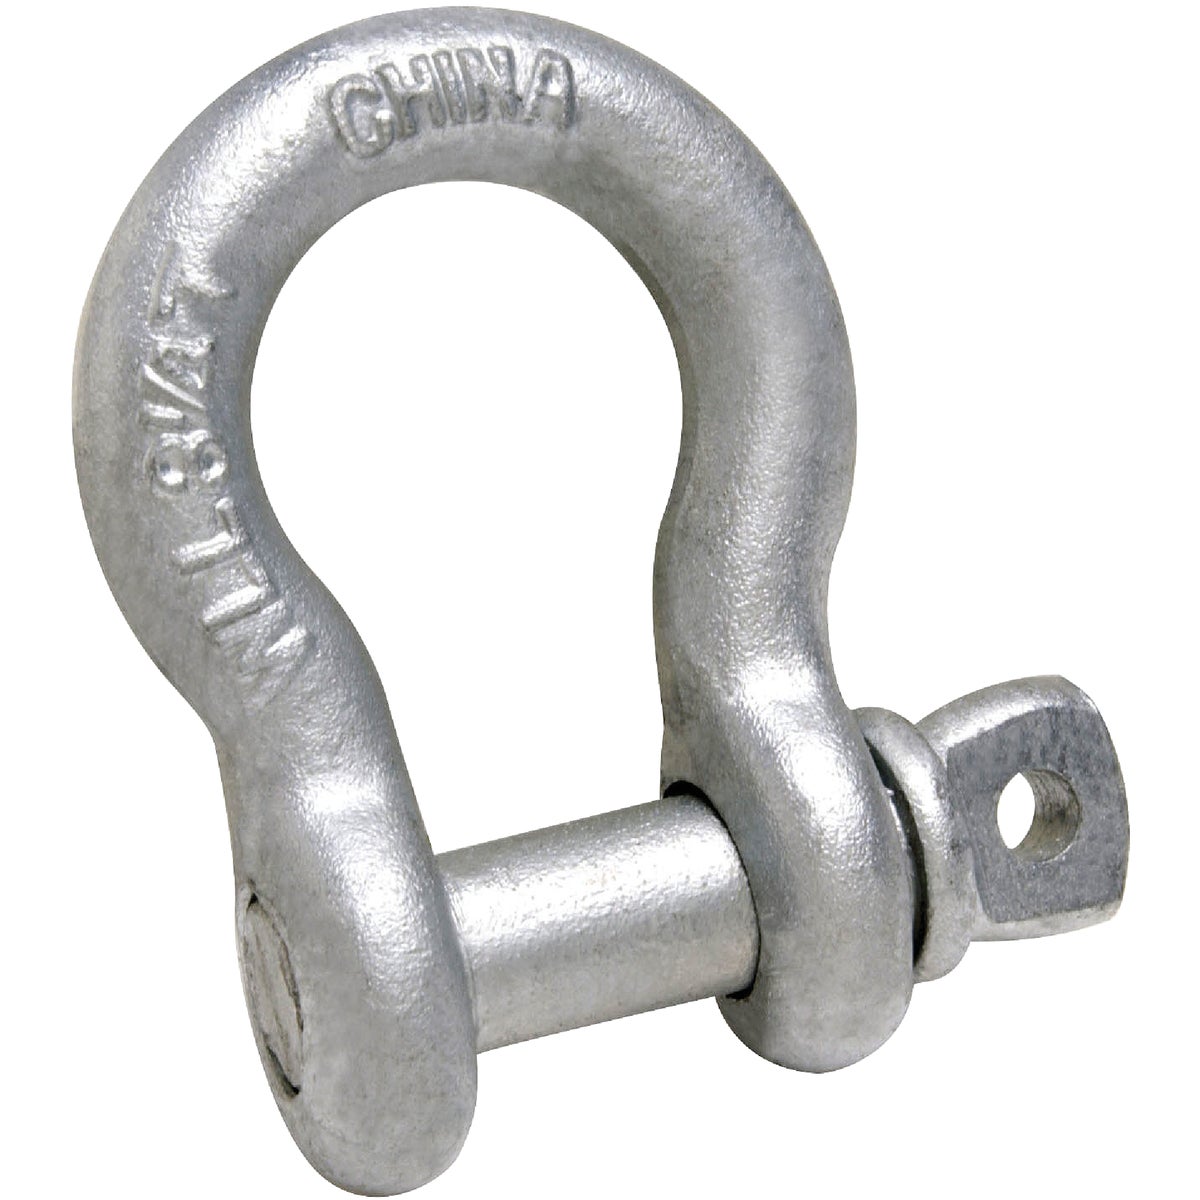 Item 769570, Screw pin anchor shackle. Forged steel construction is industrial grade.